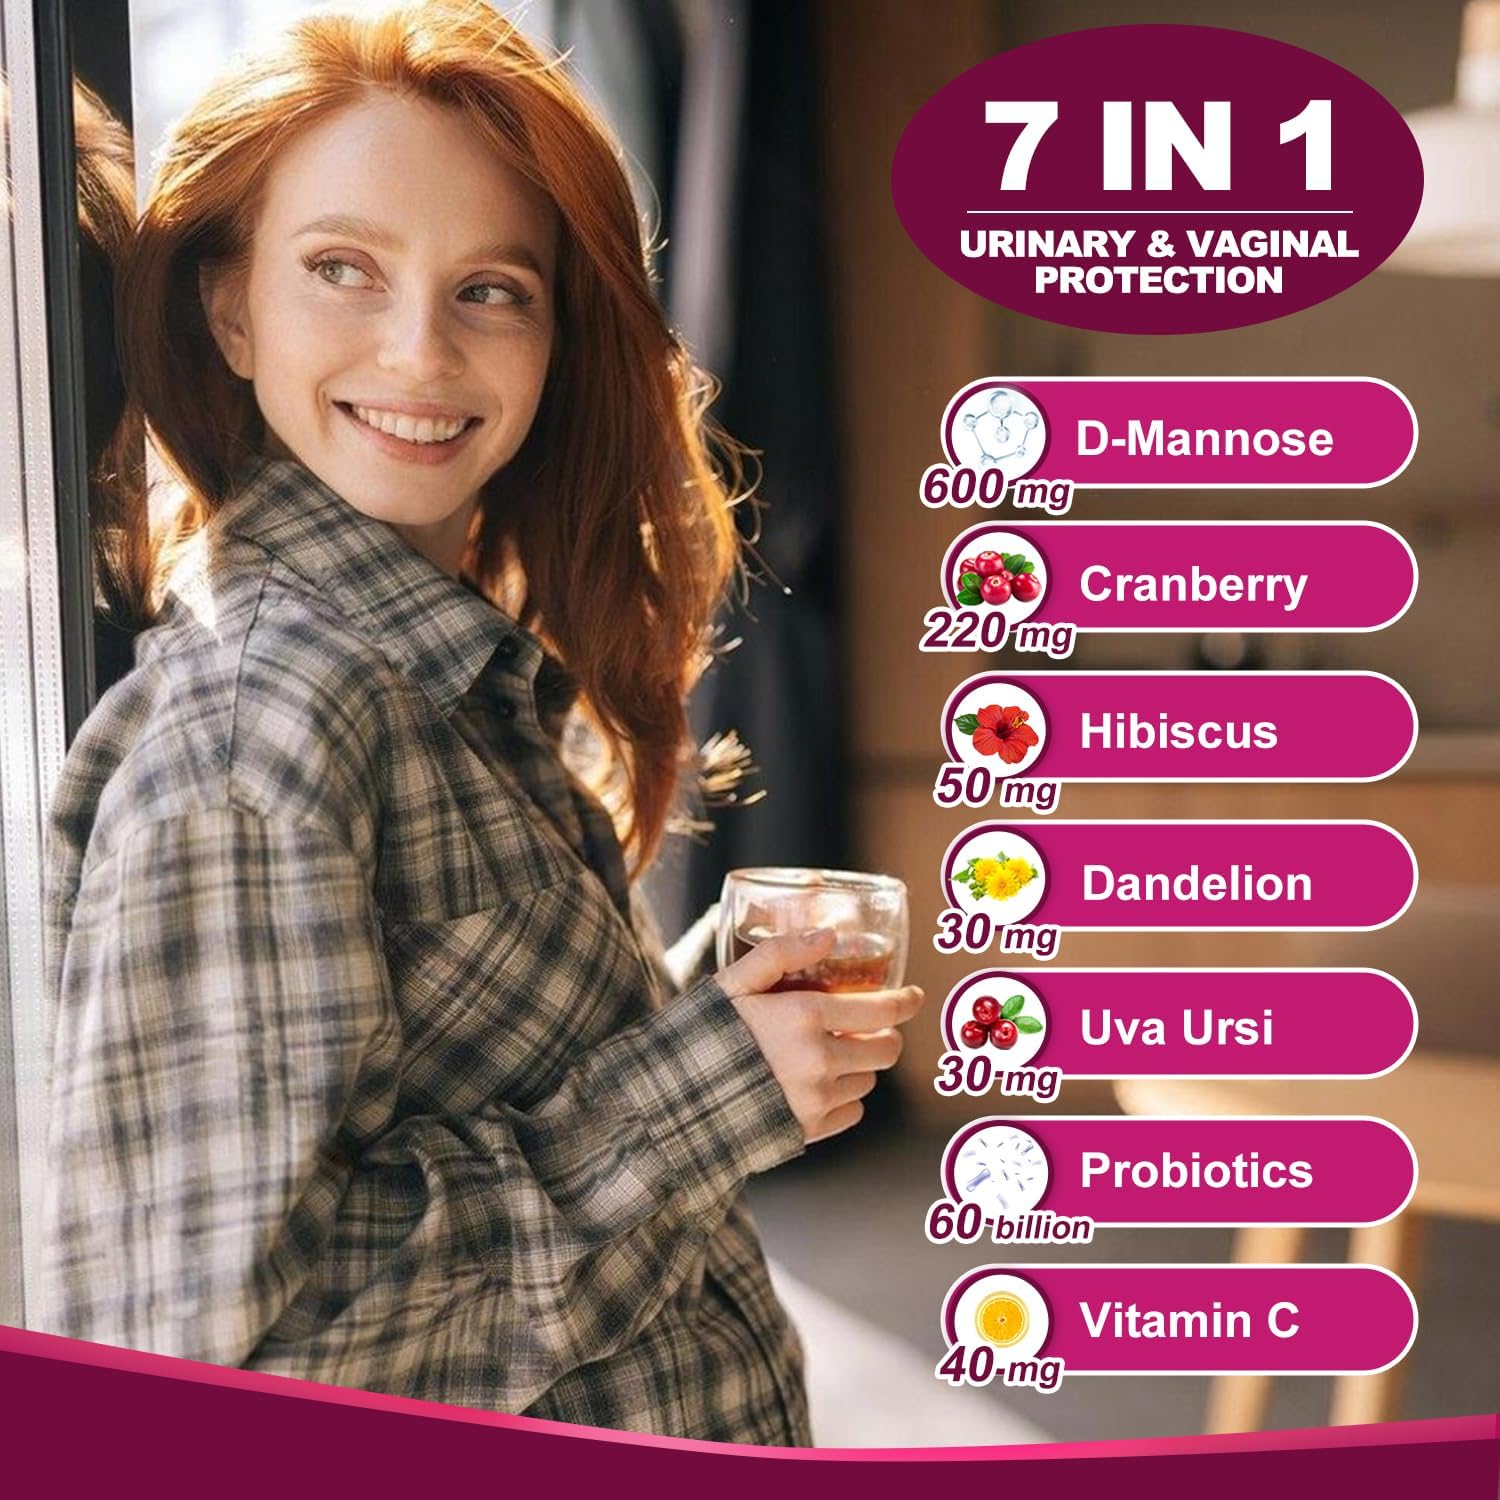 7 IN 1Probiotics protects female urinary tract and vaginal health